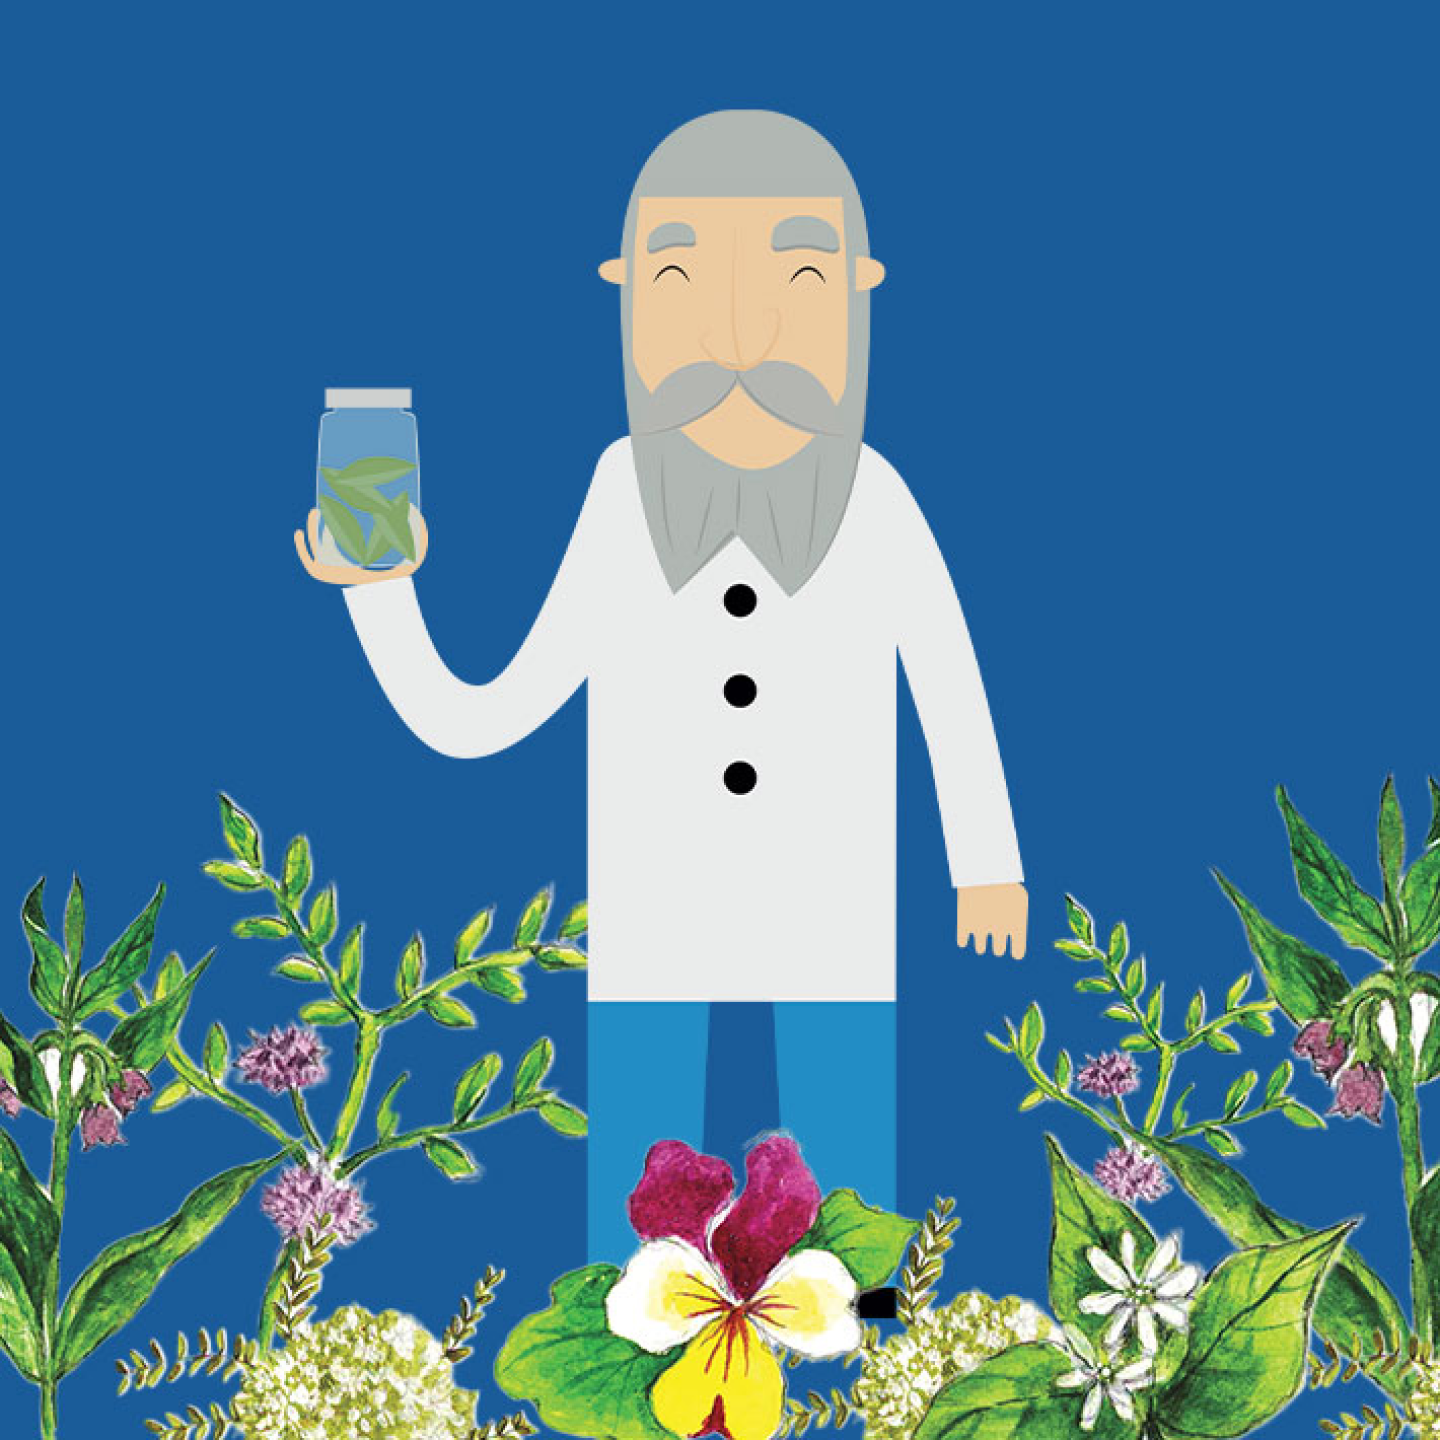 A cartoon drawing of Duncan Napier - a Scottish herbalist - whose formula of herbs is the base for belif products